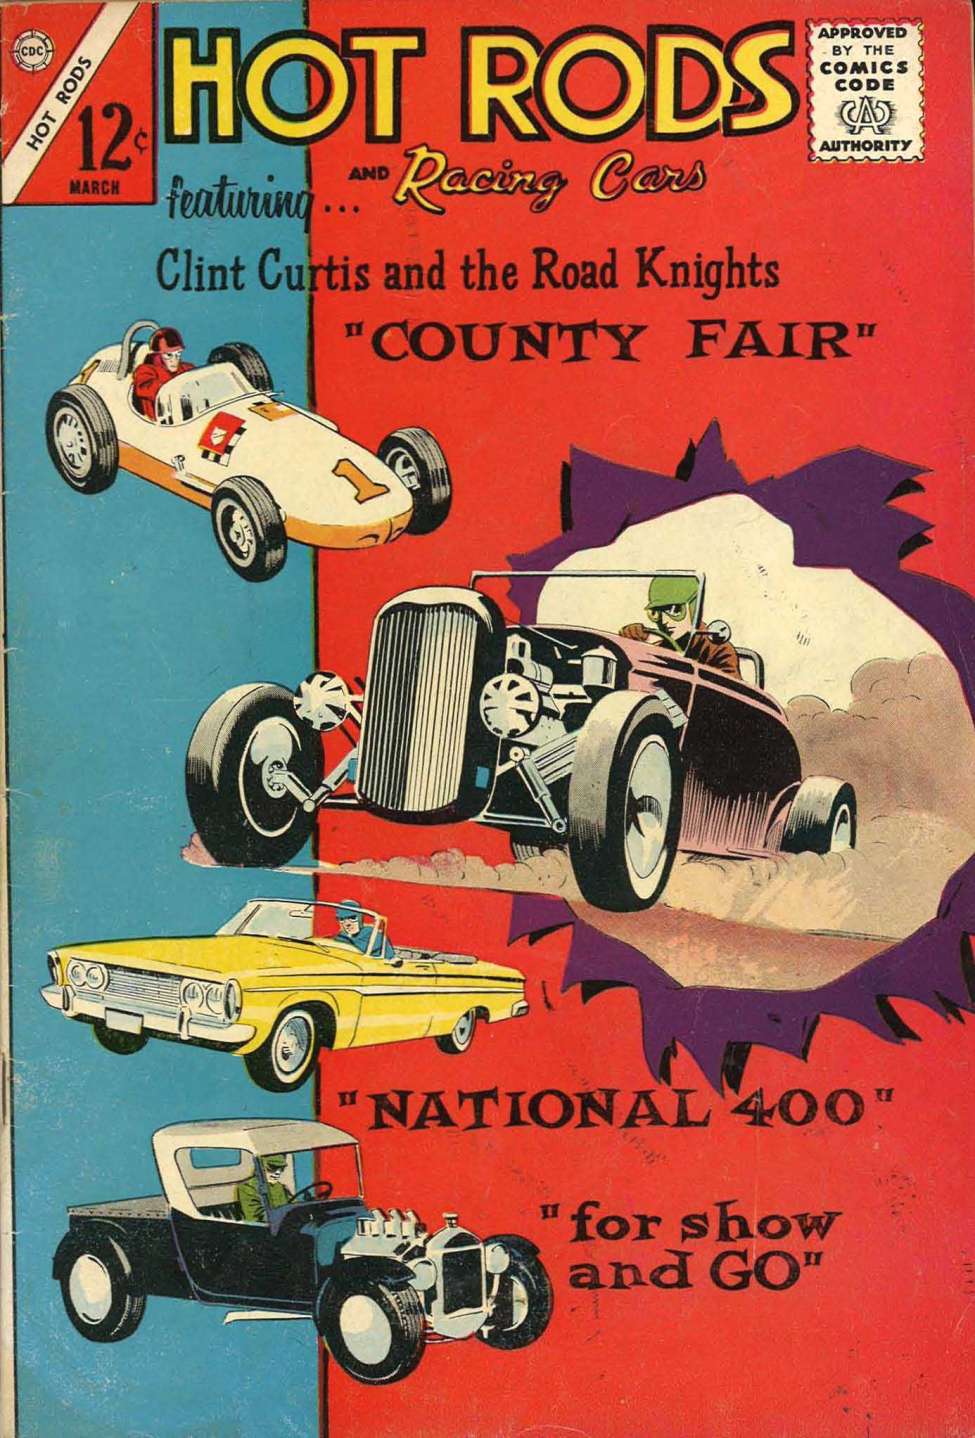 Book Cover For Hot Rods and Racing Cars 68